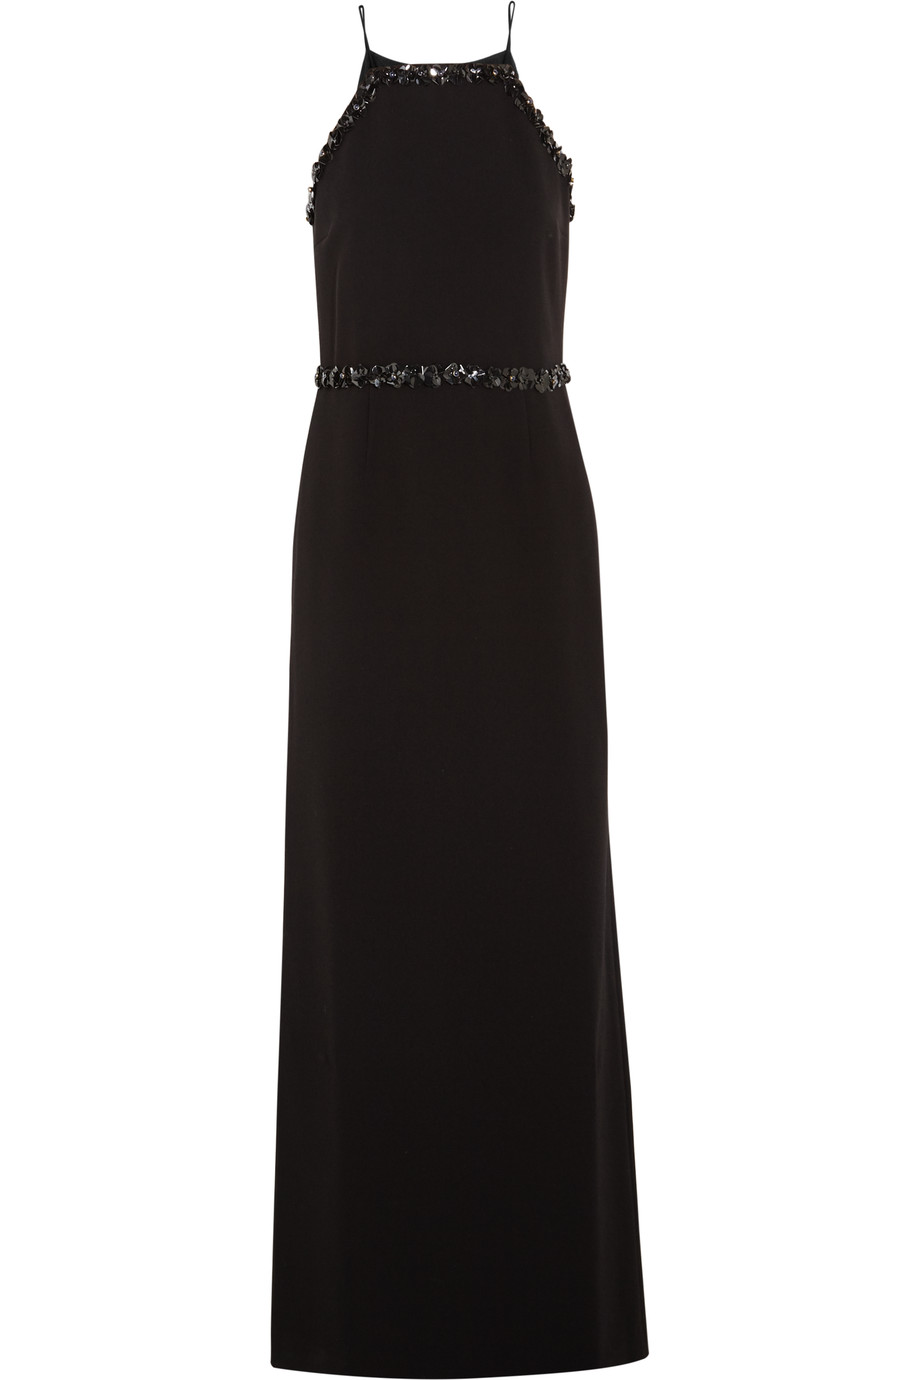 Tory Burch Embellished Crepe Gown | ModeSens